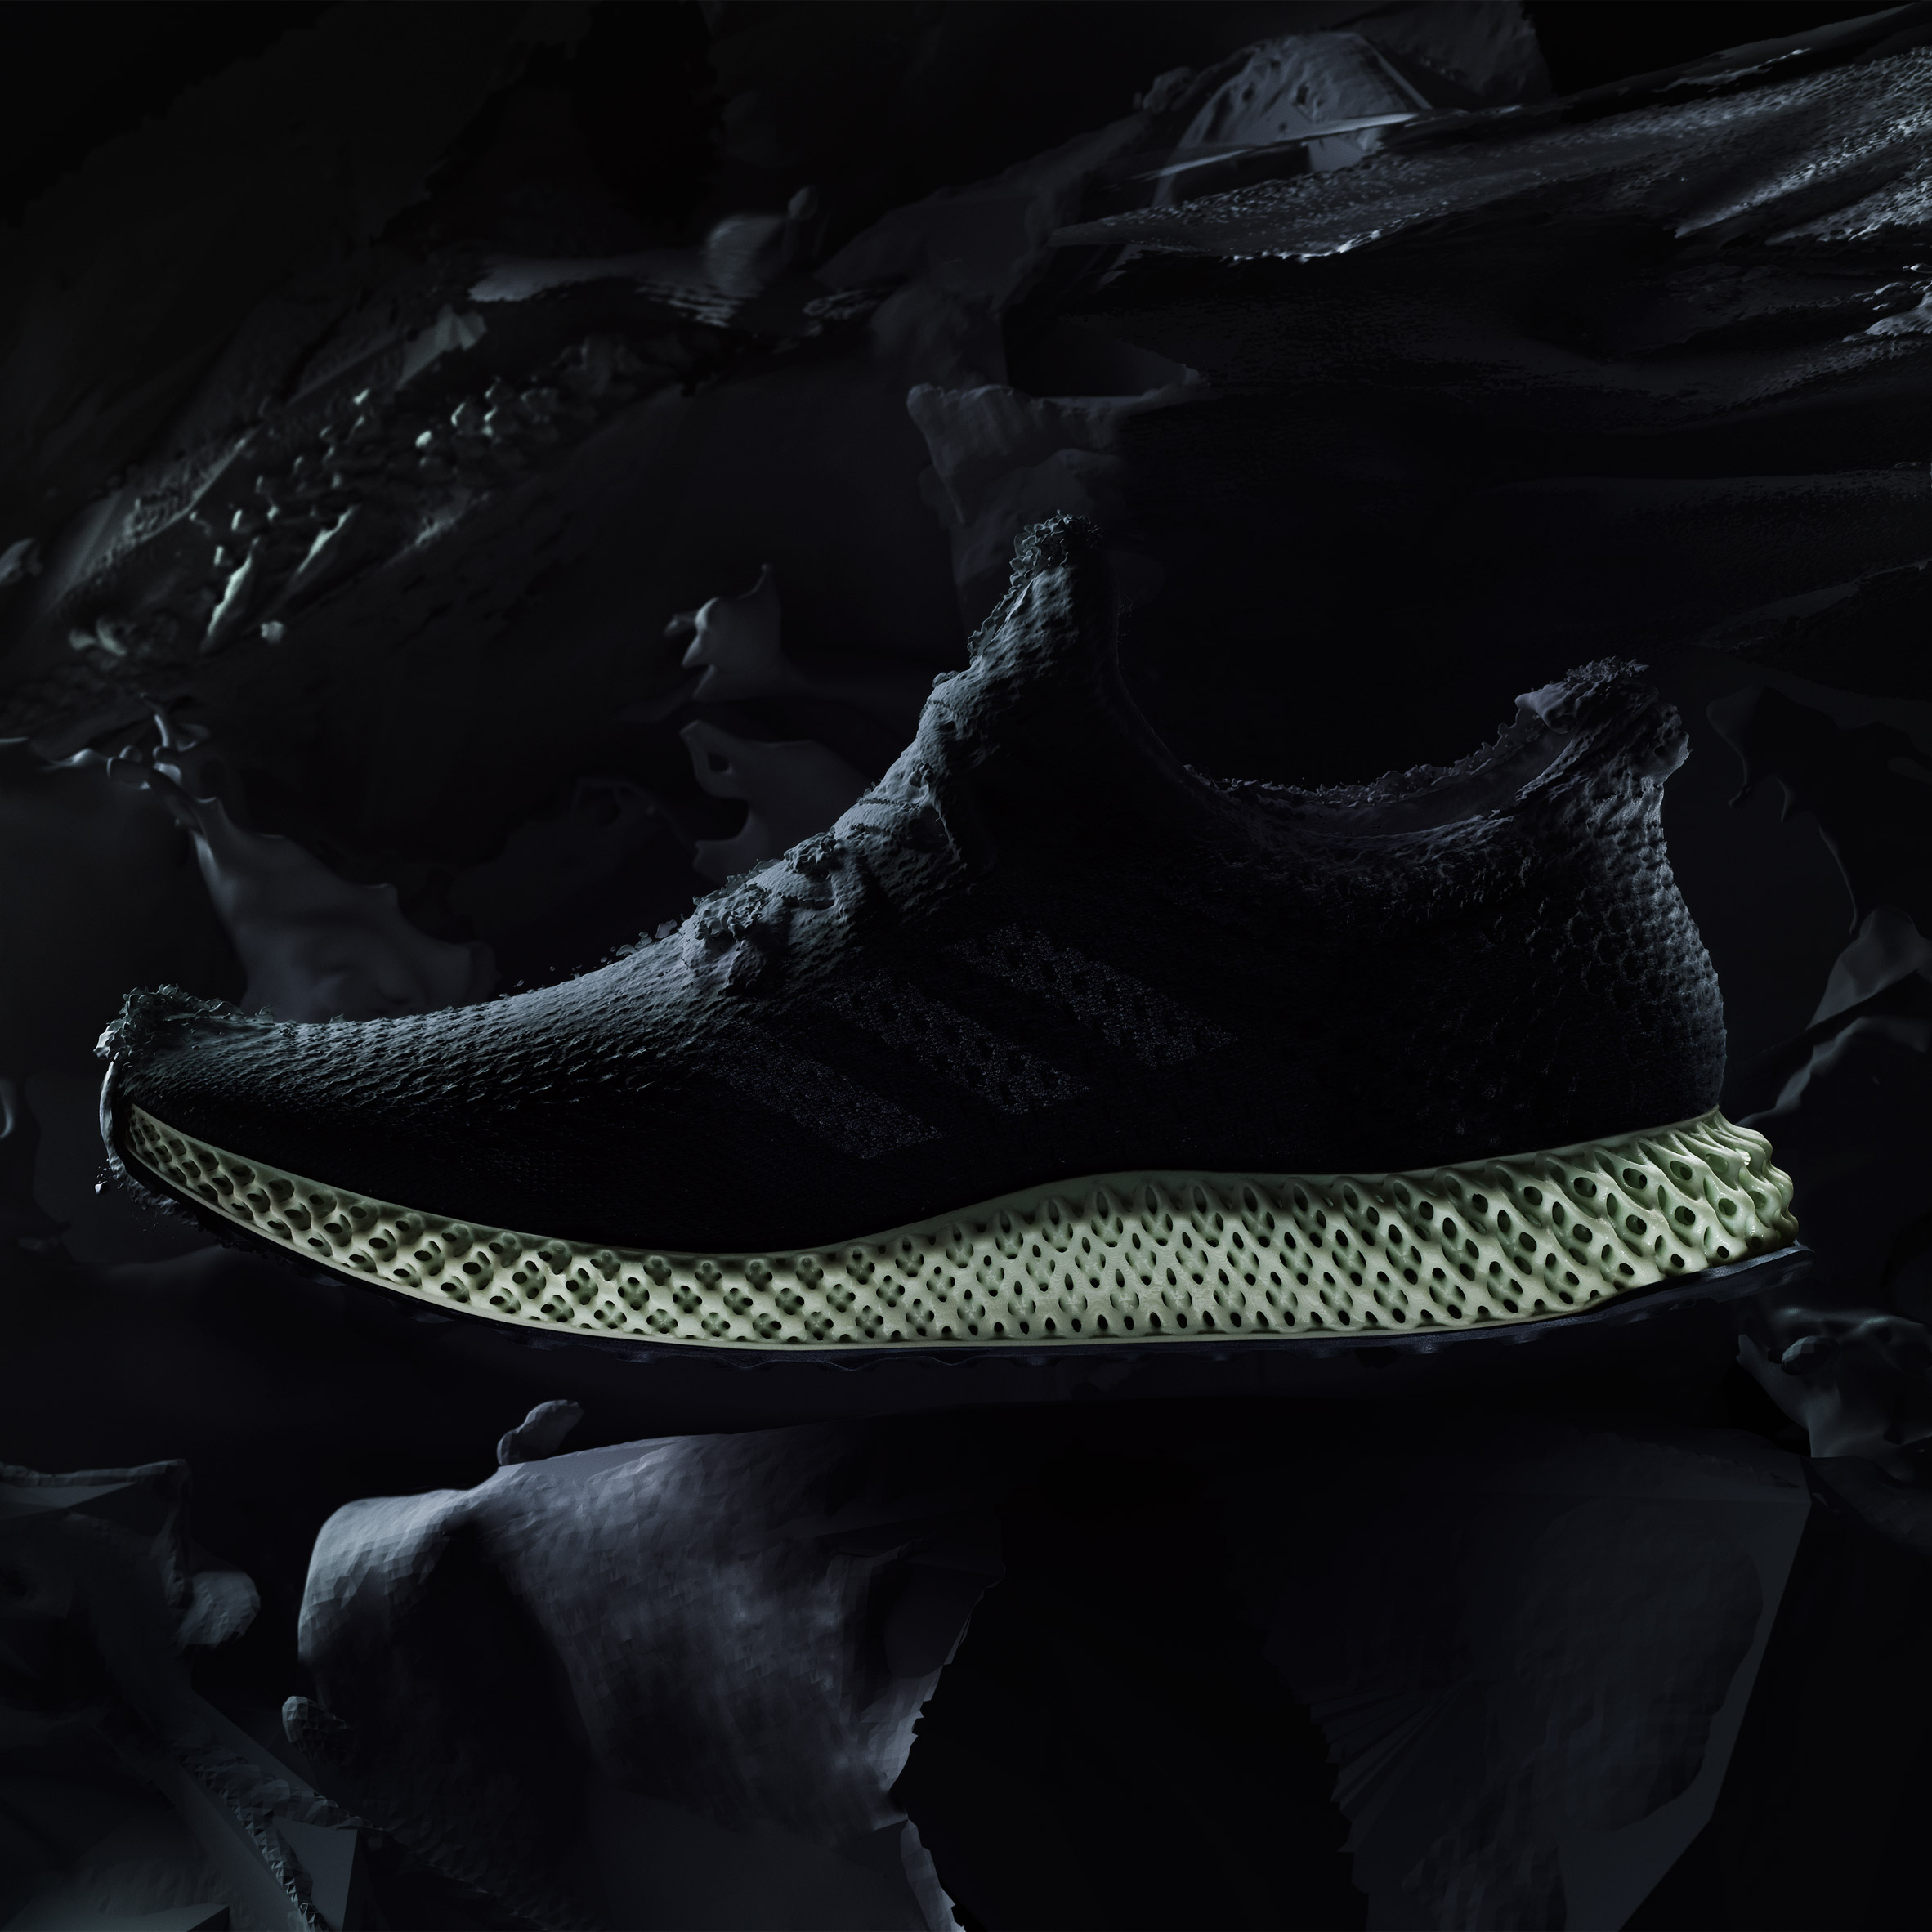 Adidas shapes Futurecraft 4D shoe soles using light and heat